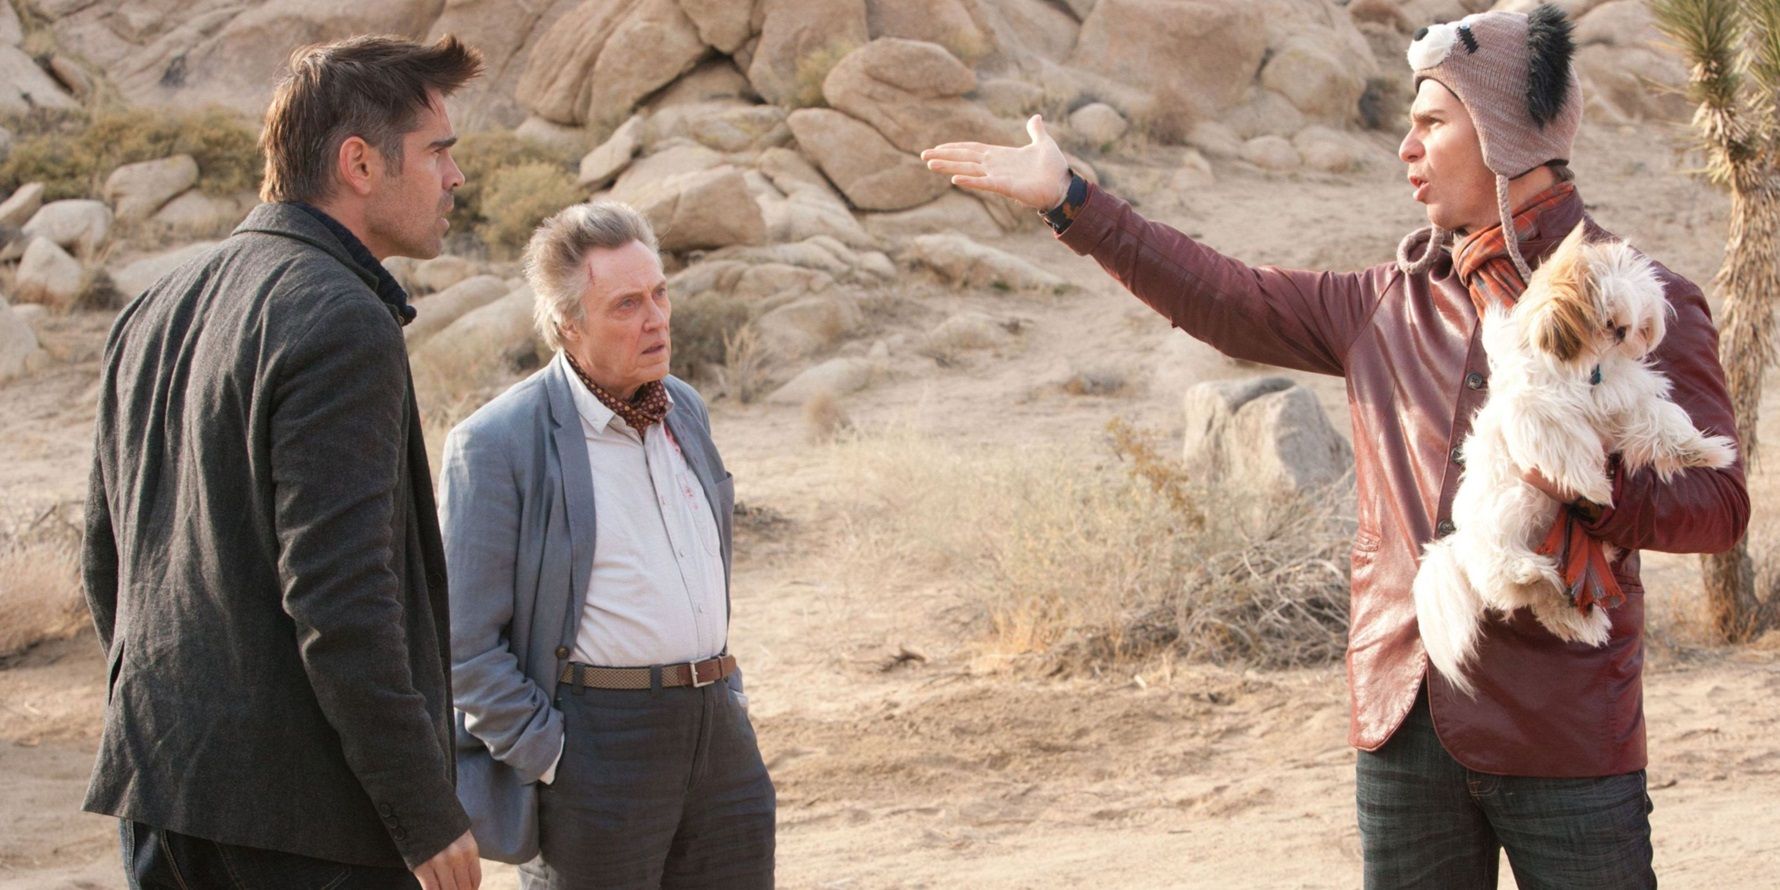 Colin Farrell in the desert with Christopher Walken and Sam Rockwell in Seven Psychopaths